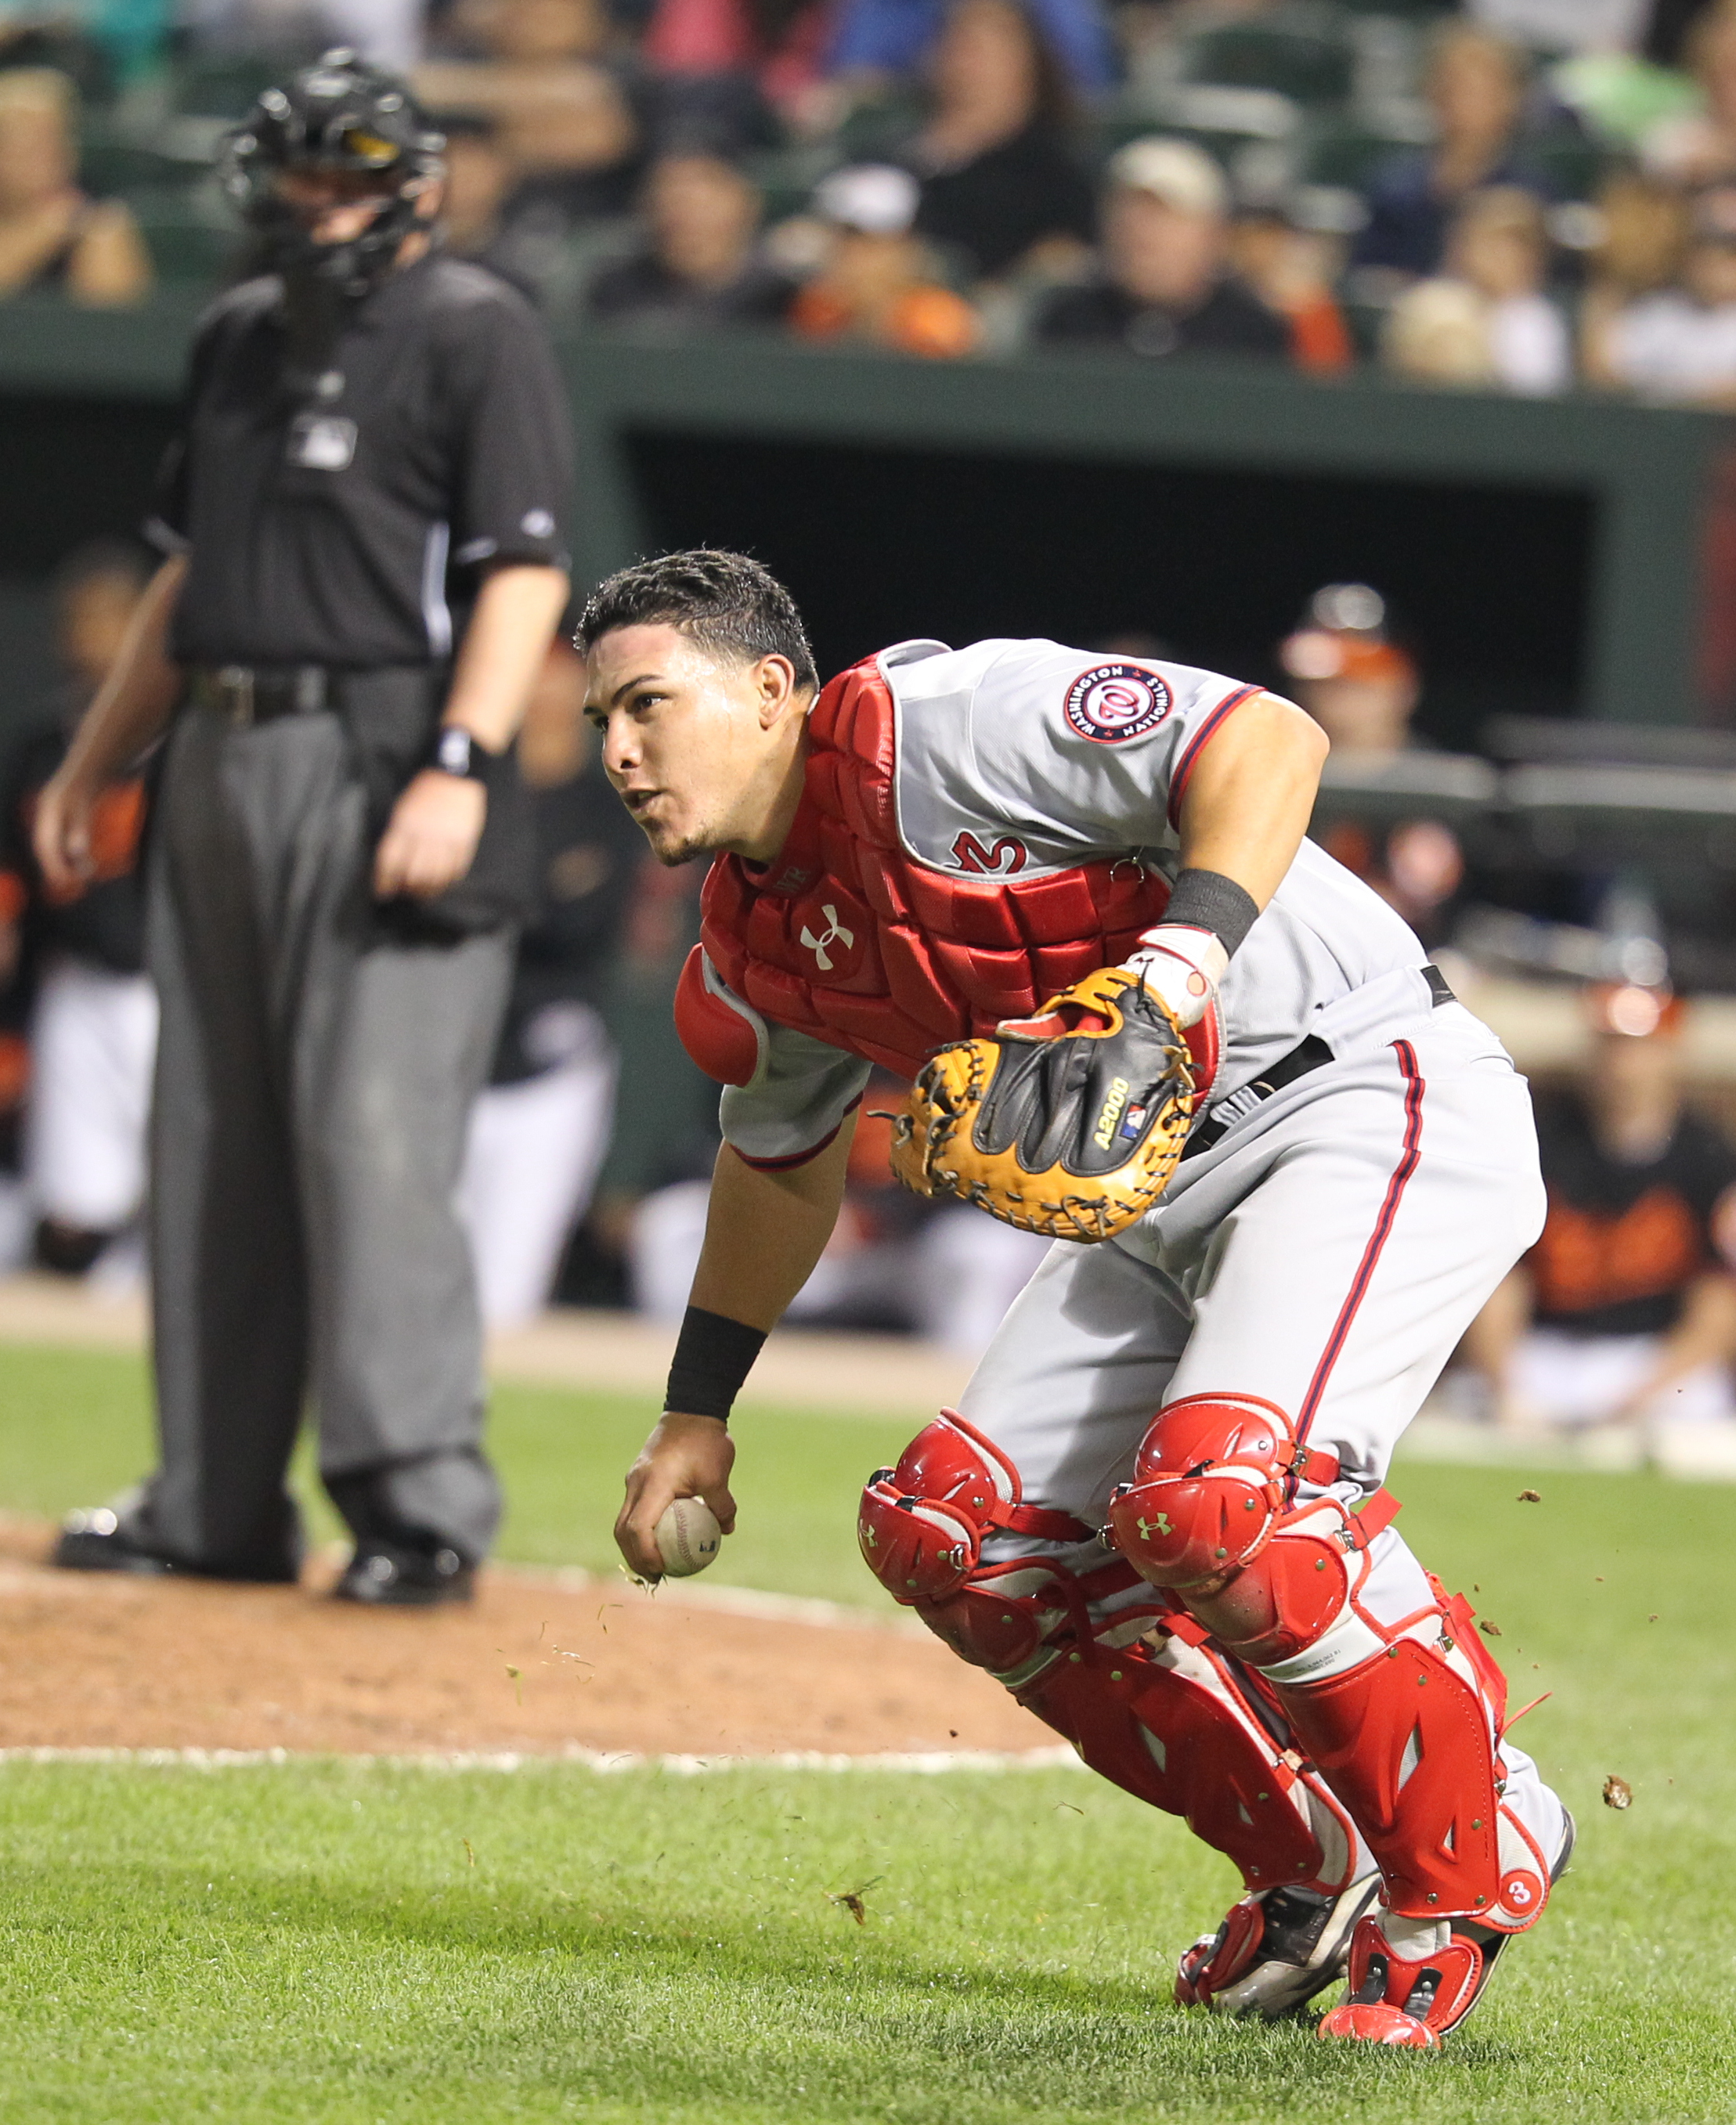 The Rays reportedly have inked a two-year deal with catcher Wilson Ramos, formerly of the Washington Nationals. (Photo Credit: Keith Allison)